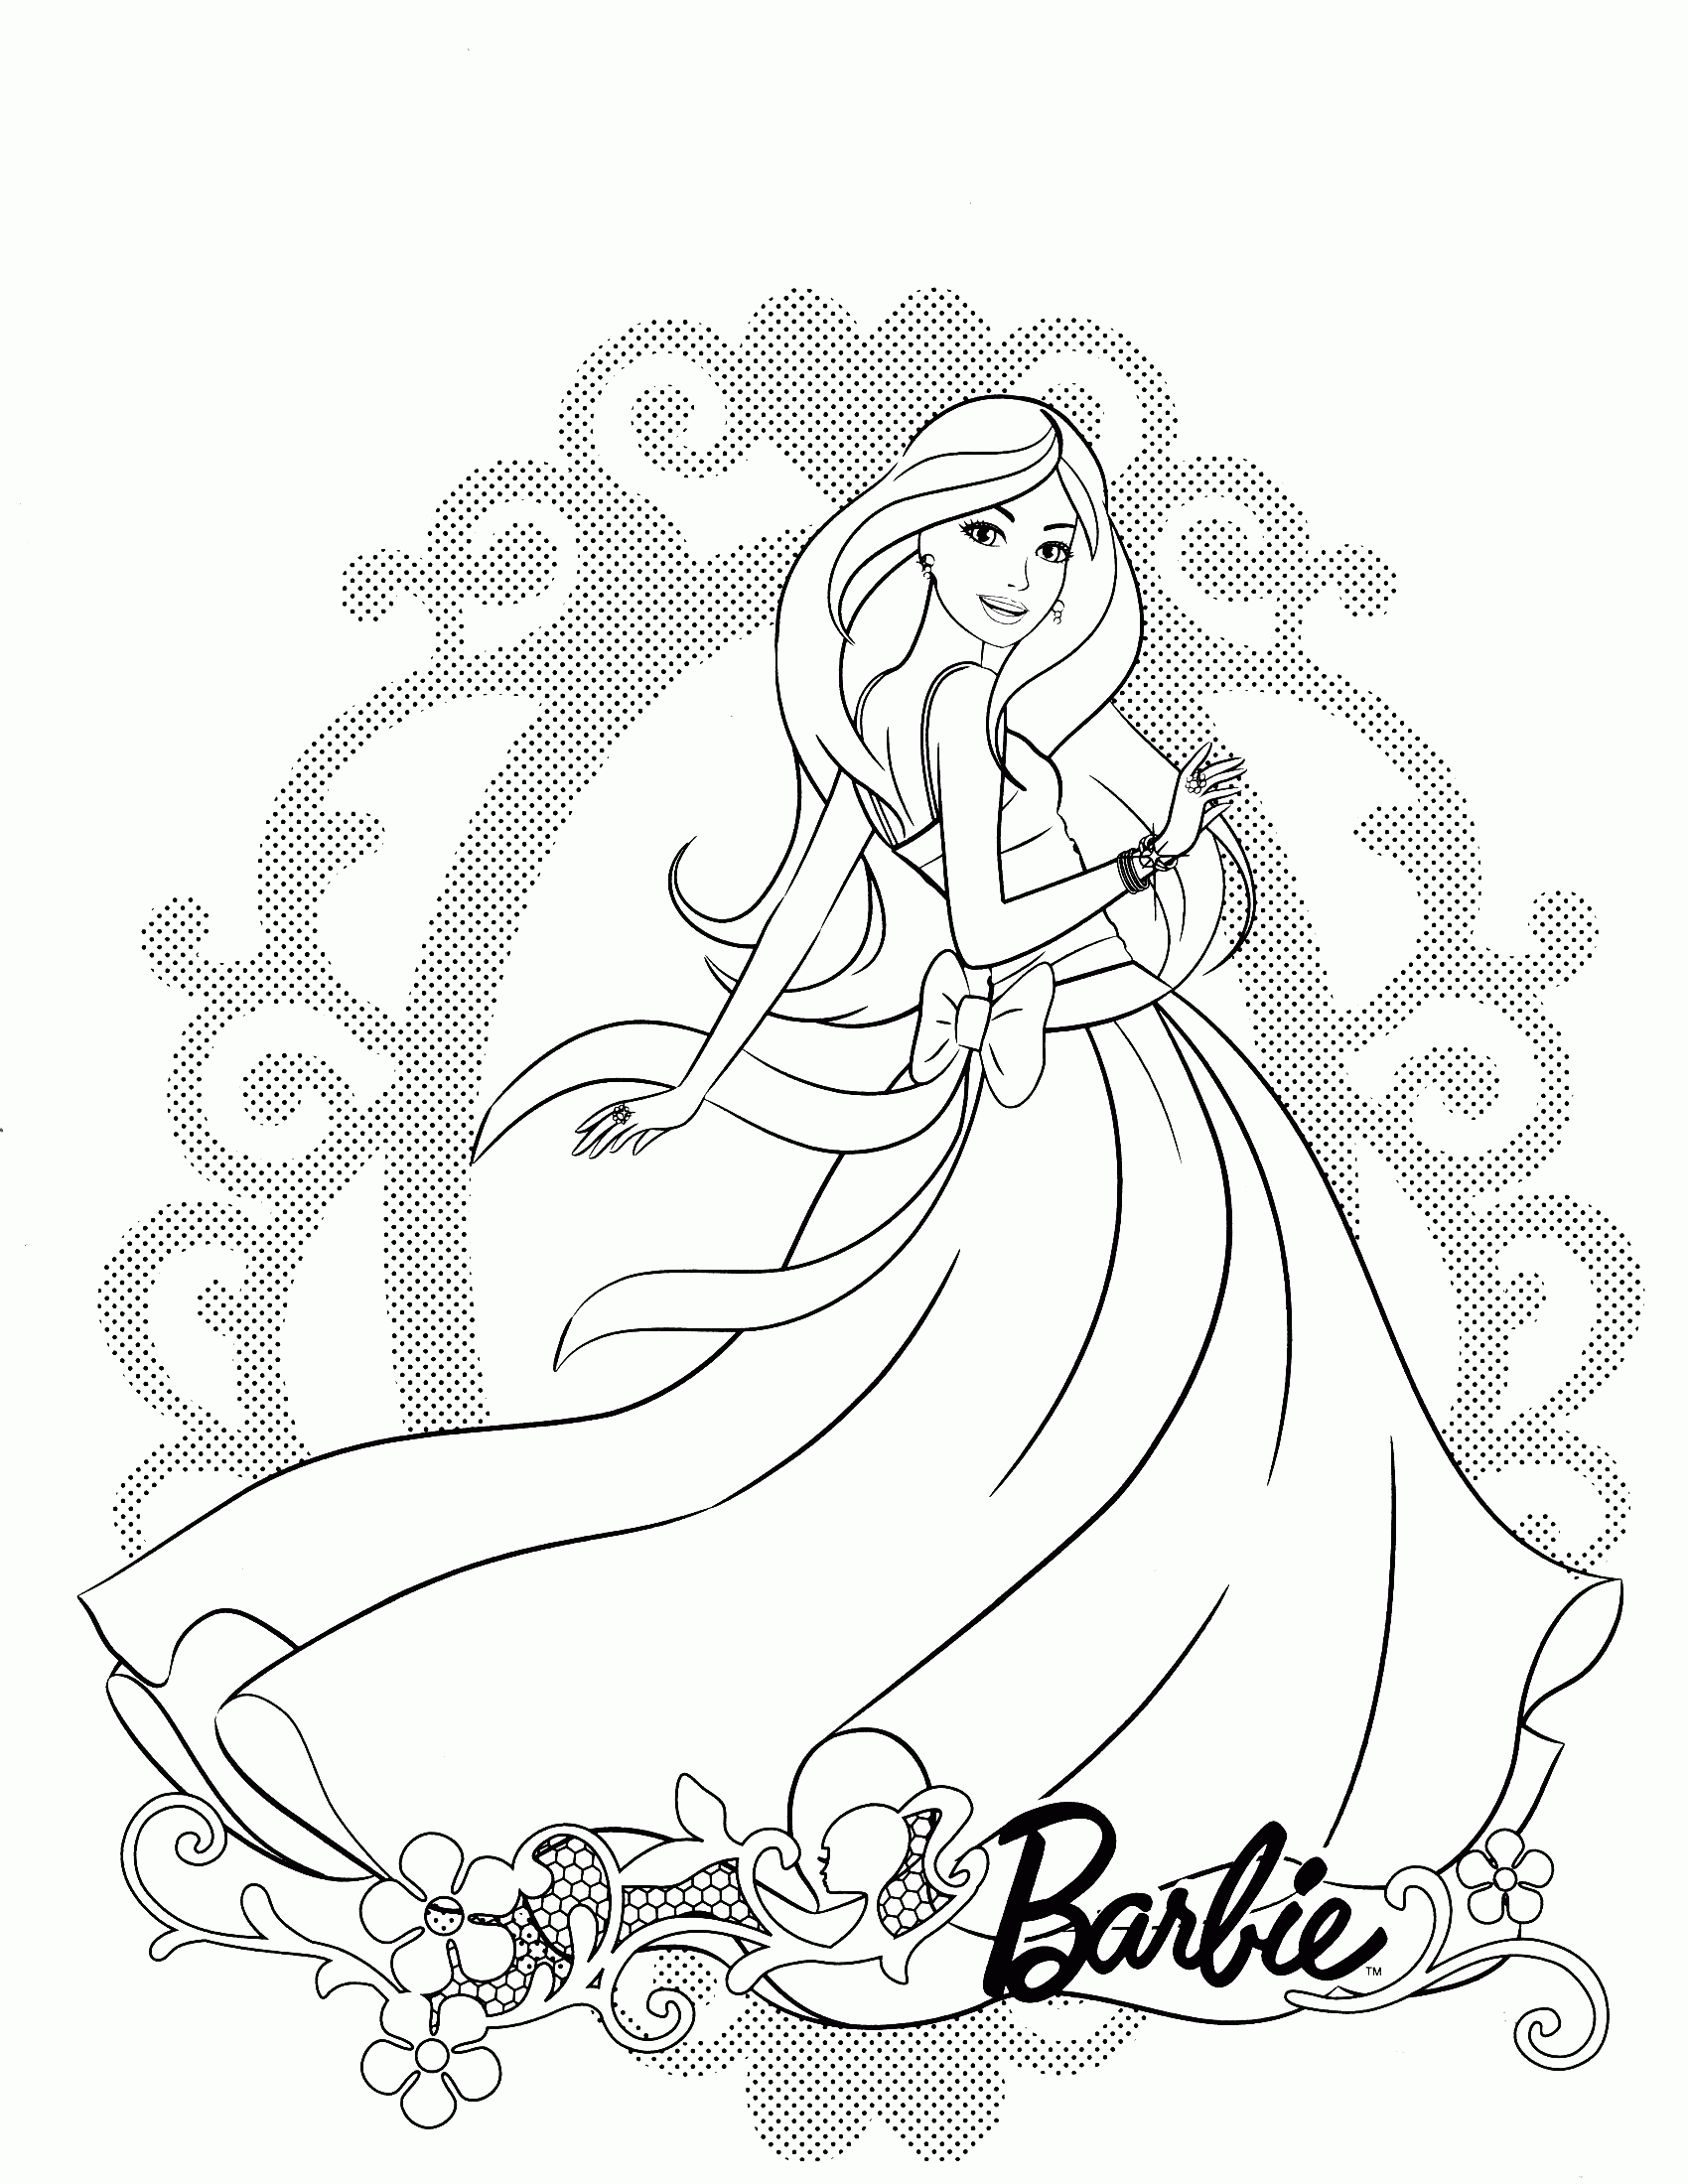 barbie dream house coloring pages - High Quality Coloring Pages